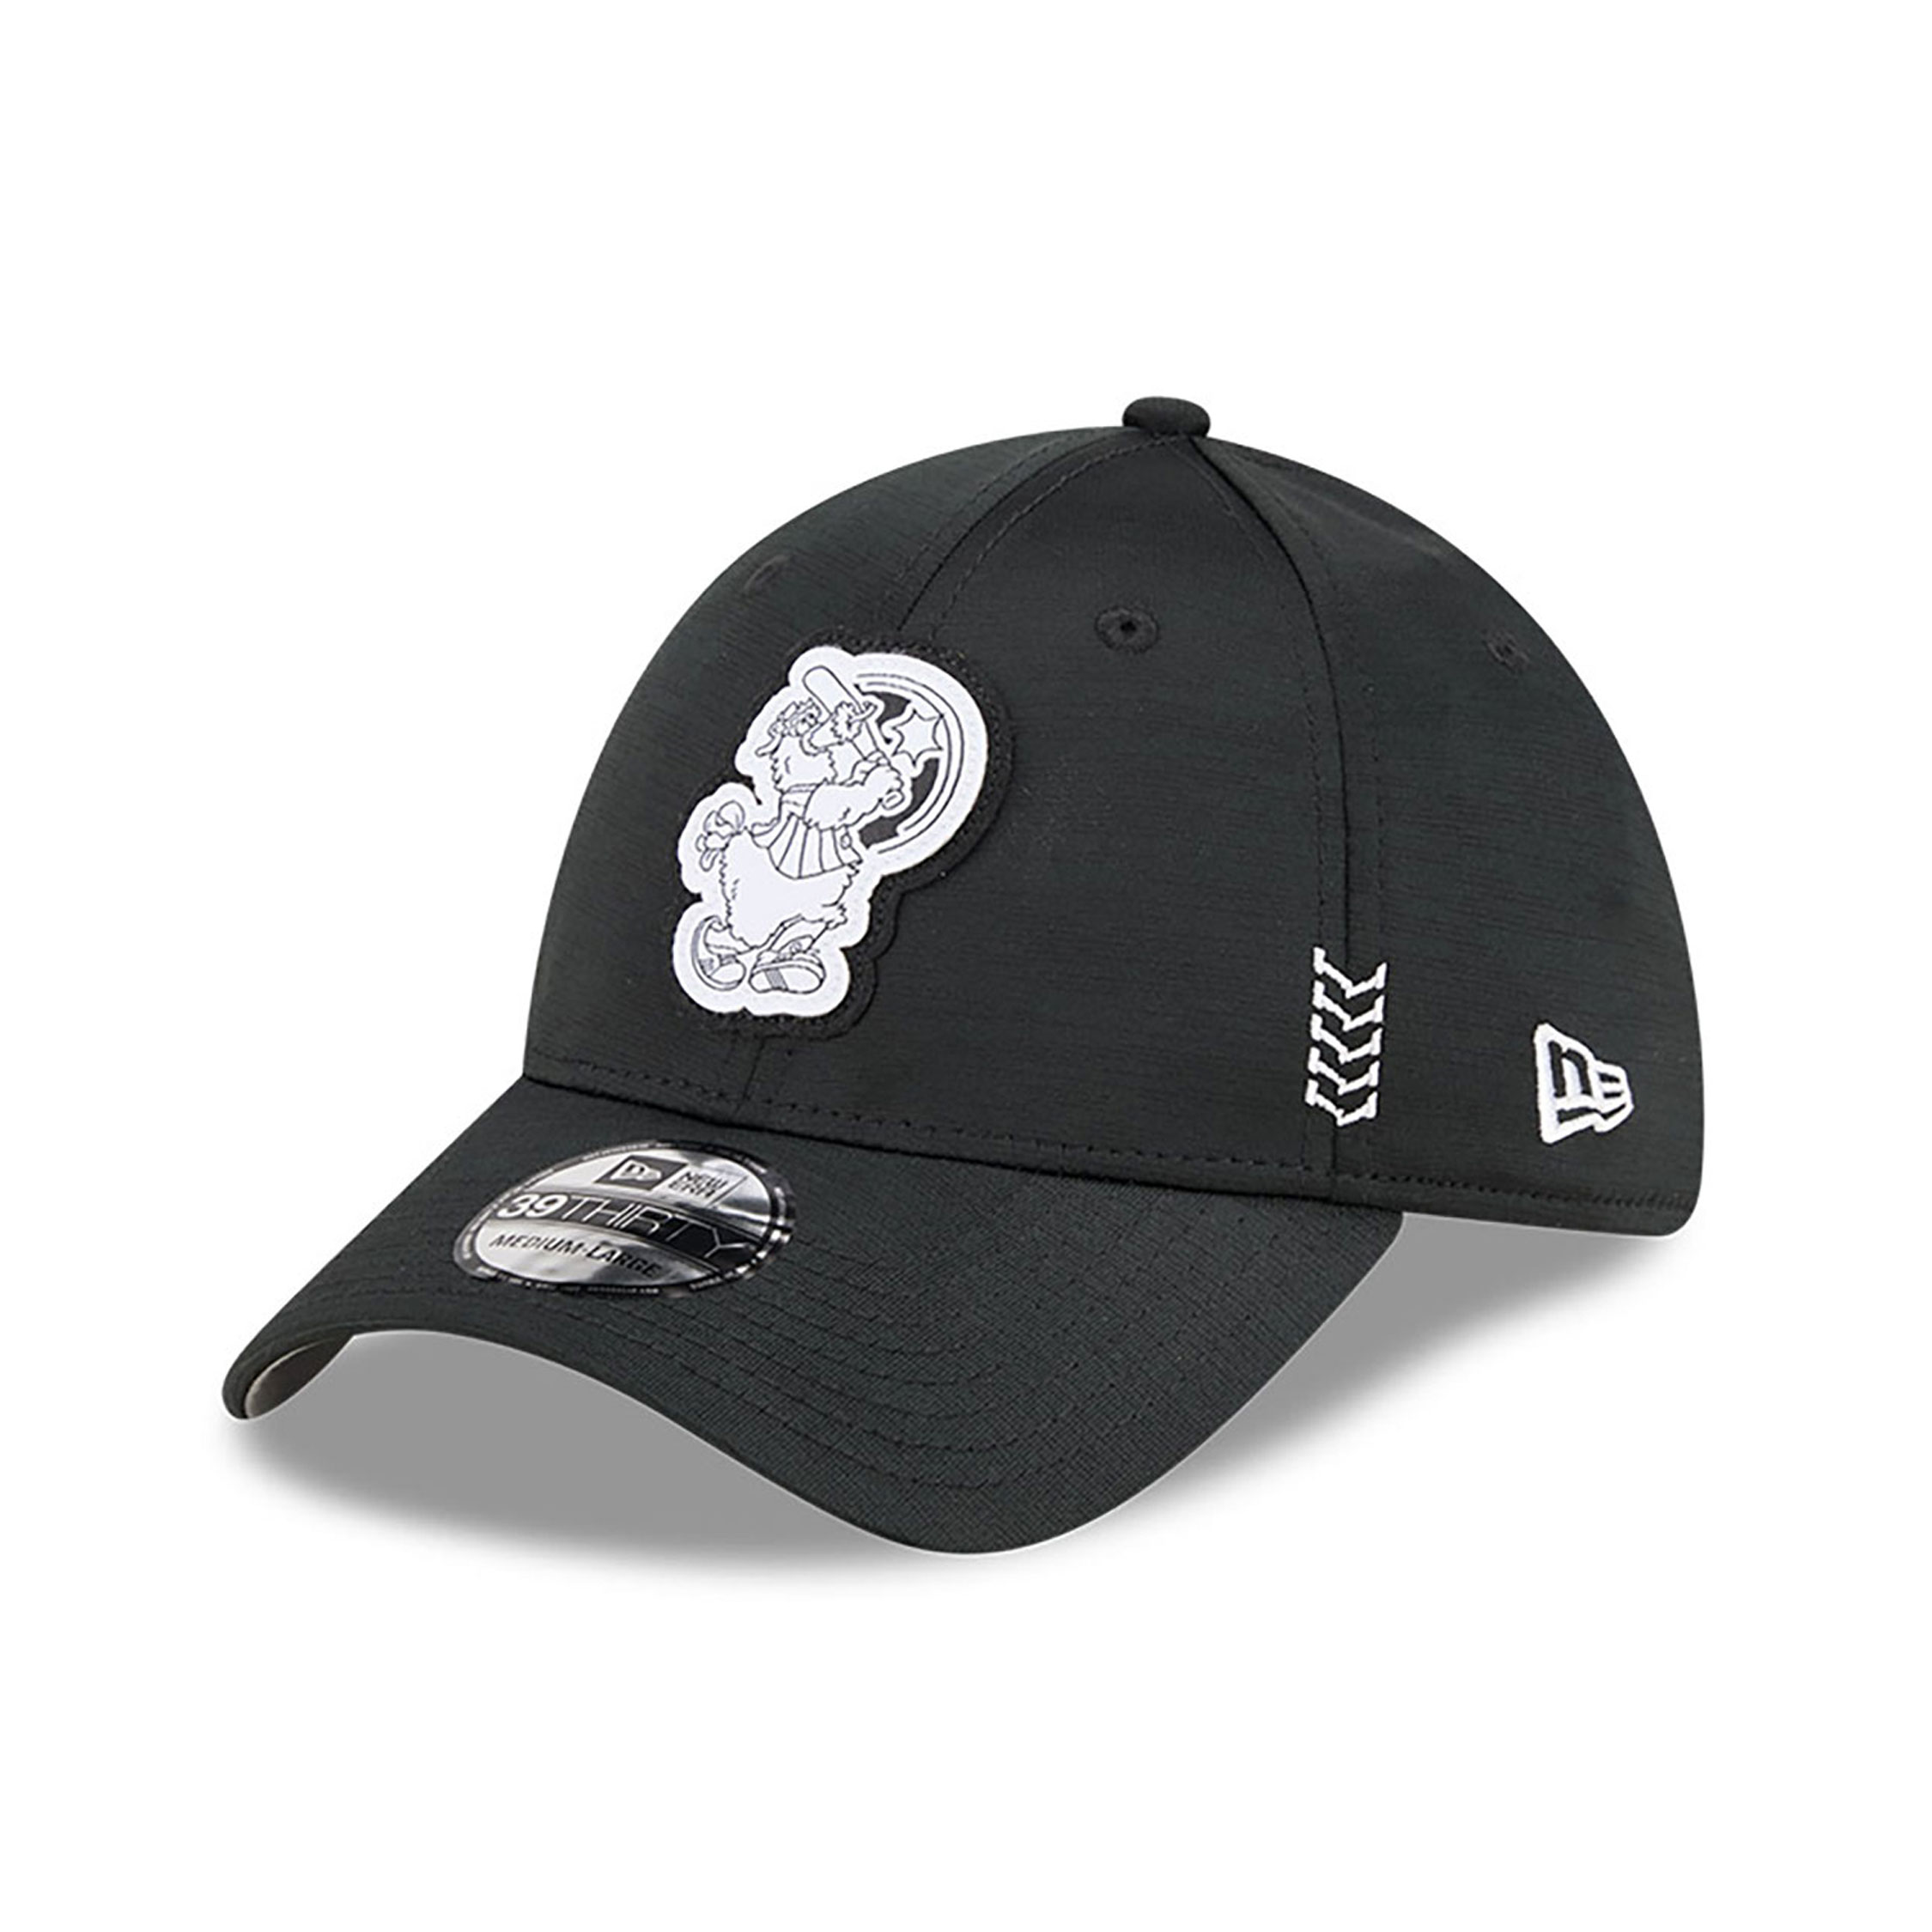 Philadelphia Phillies Clubhouse Black 39THIRTY Stretch Fit Cap